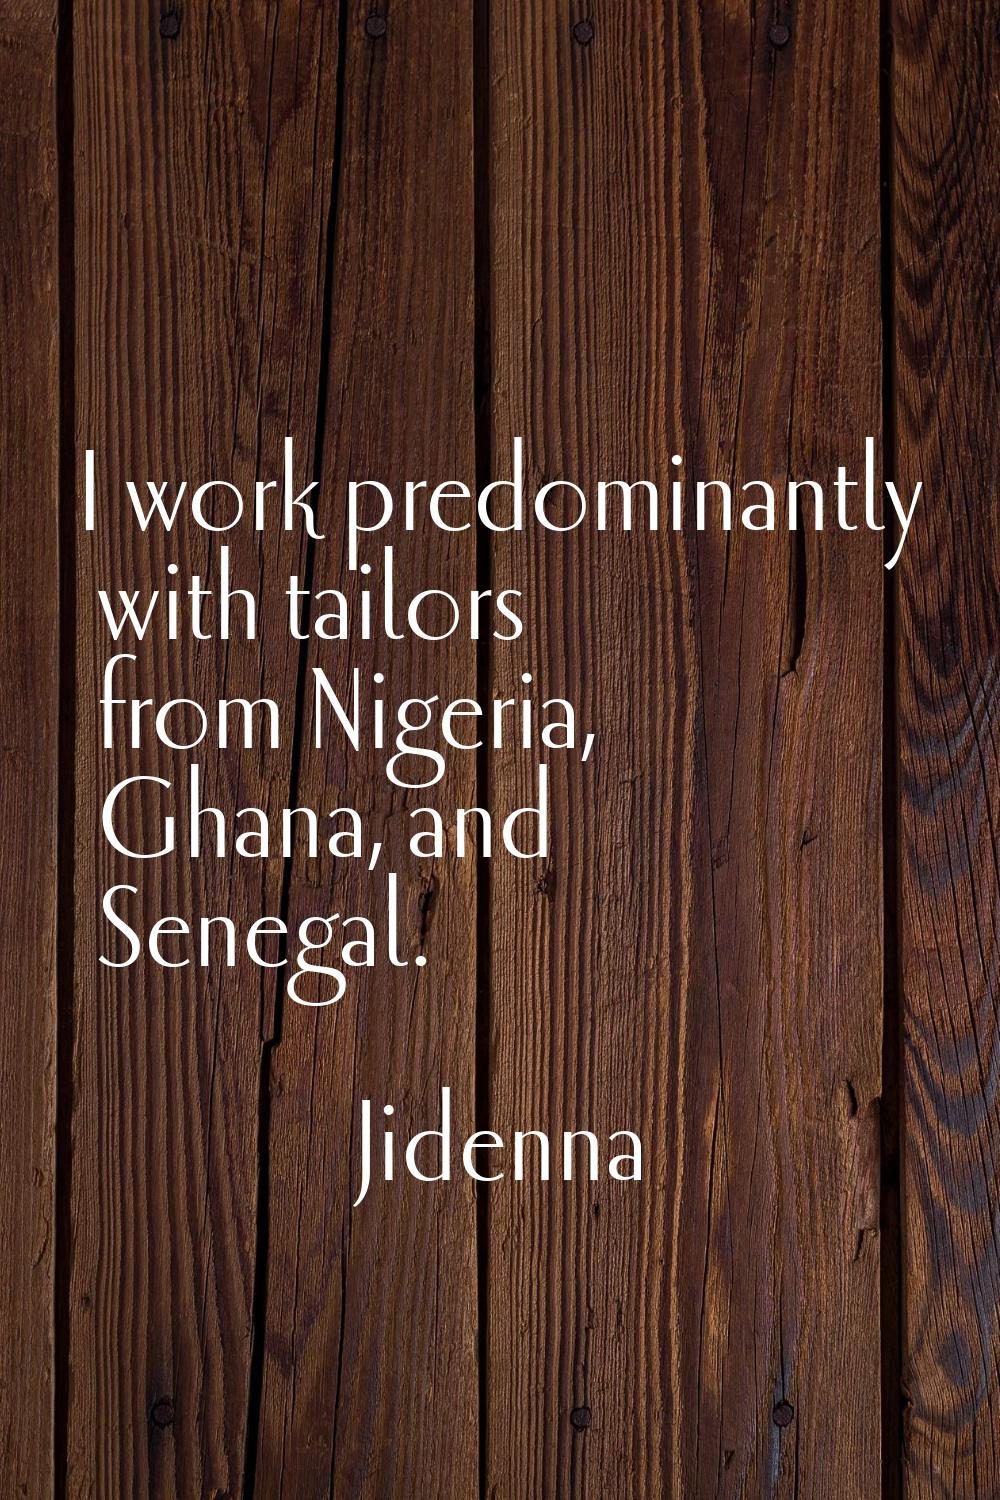 I work predominantly with tailors from Nigeria, Ghana, and Senegal.